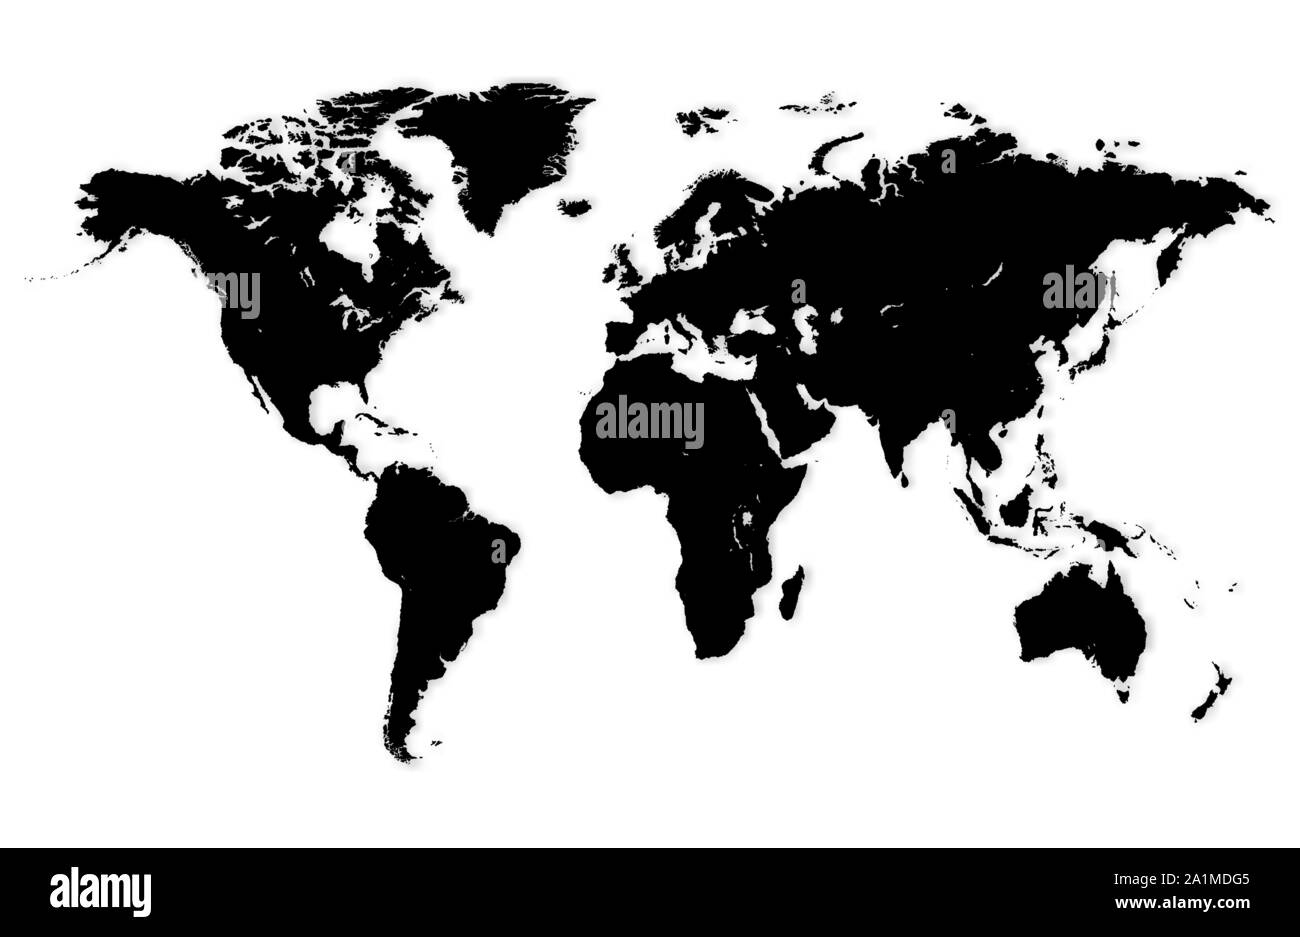 Planet Map Black And White Stock Photos Images Alamy